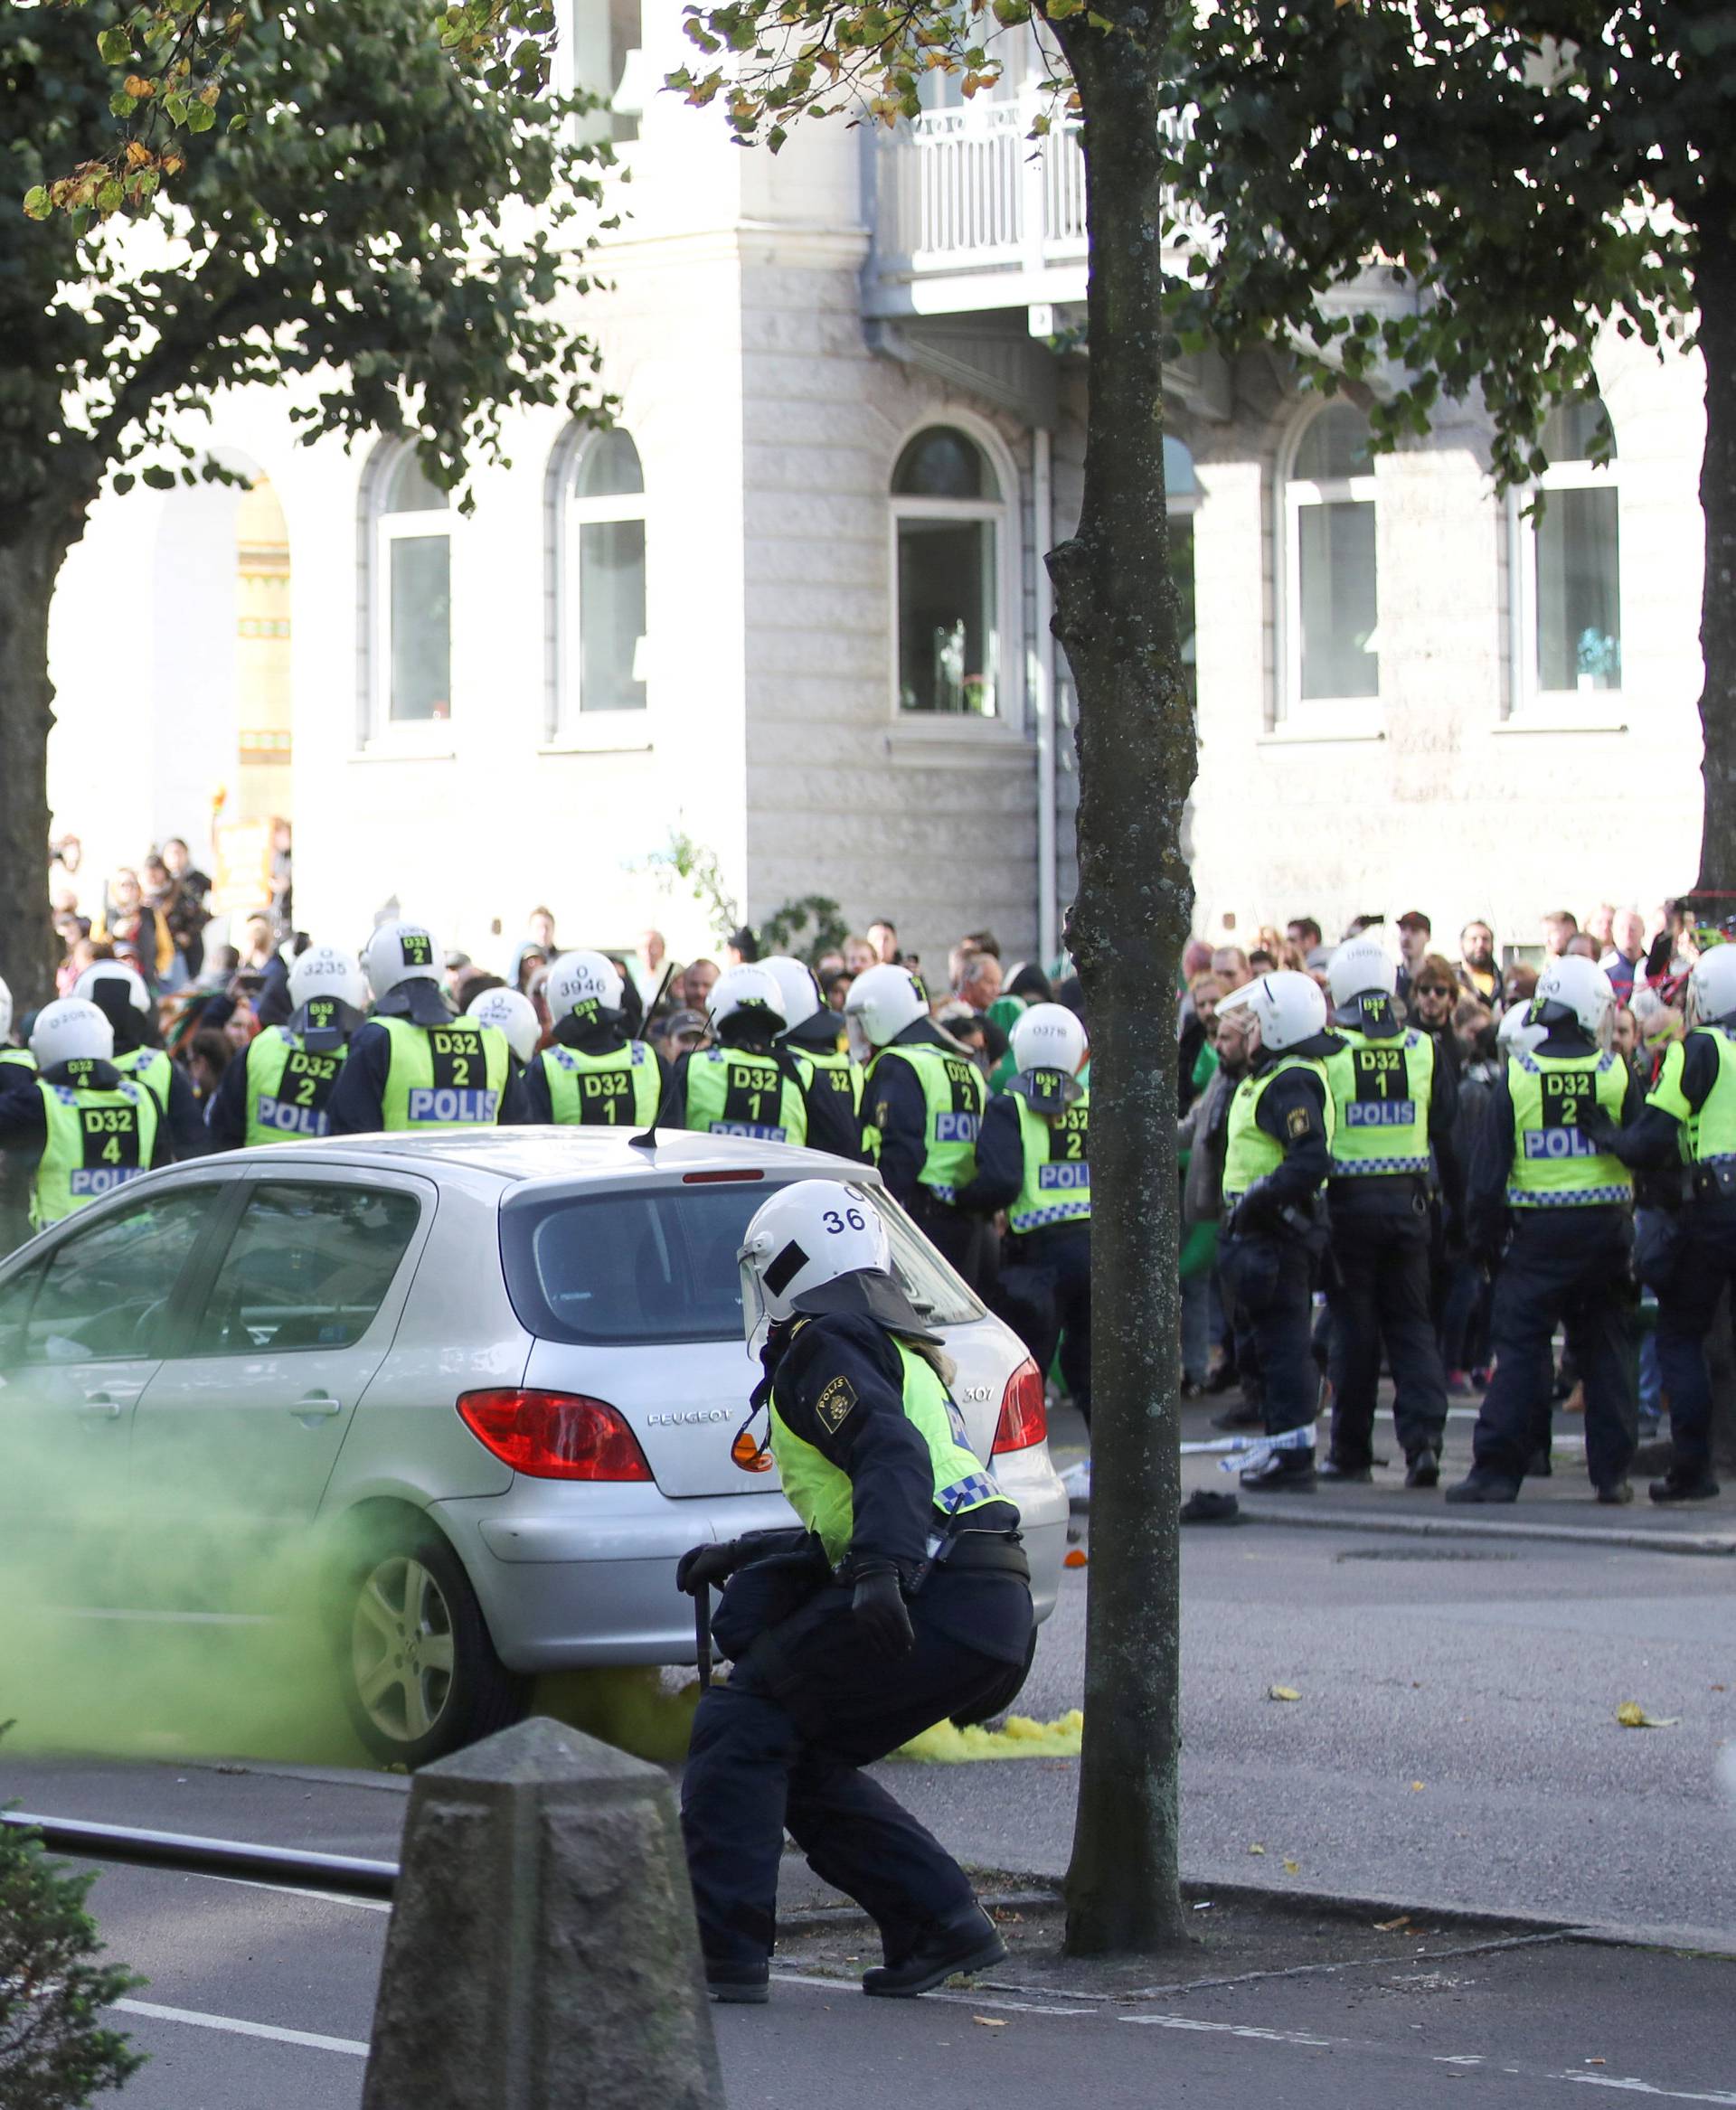 Police officers react to counter-demonstrators prior to the Nordic Resistance Movement's (NMR) march in central Gothenburg